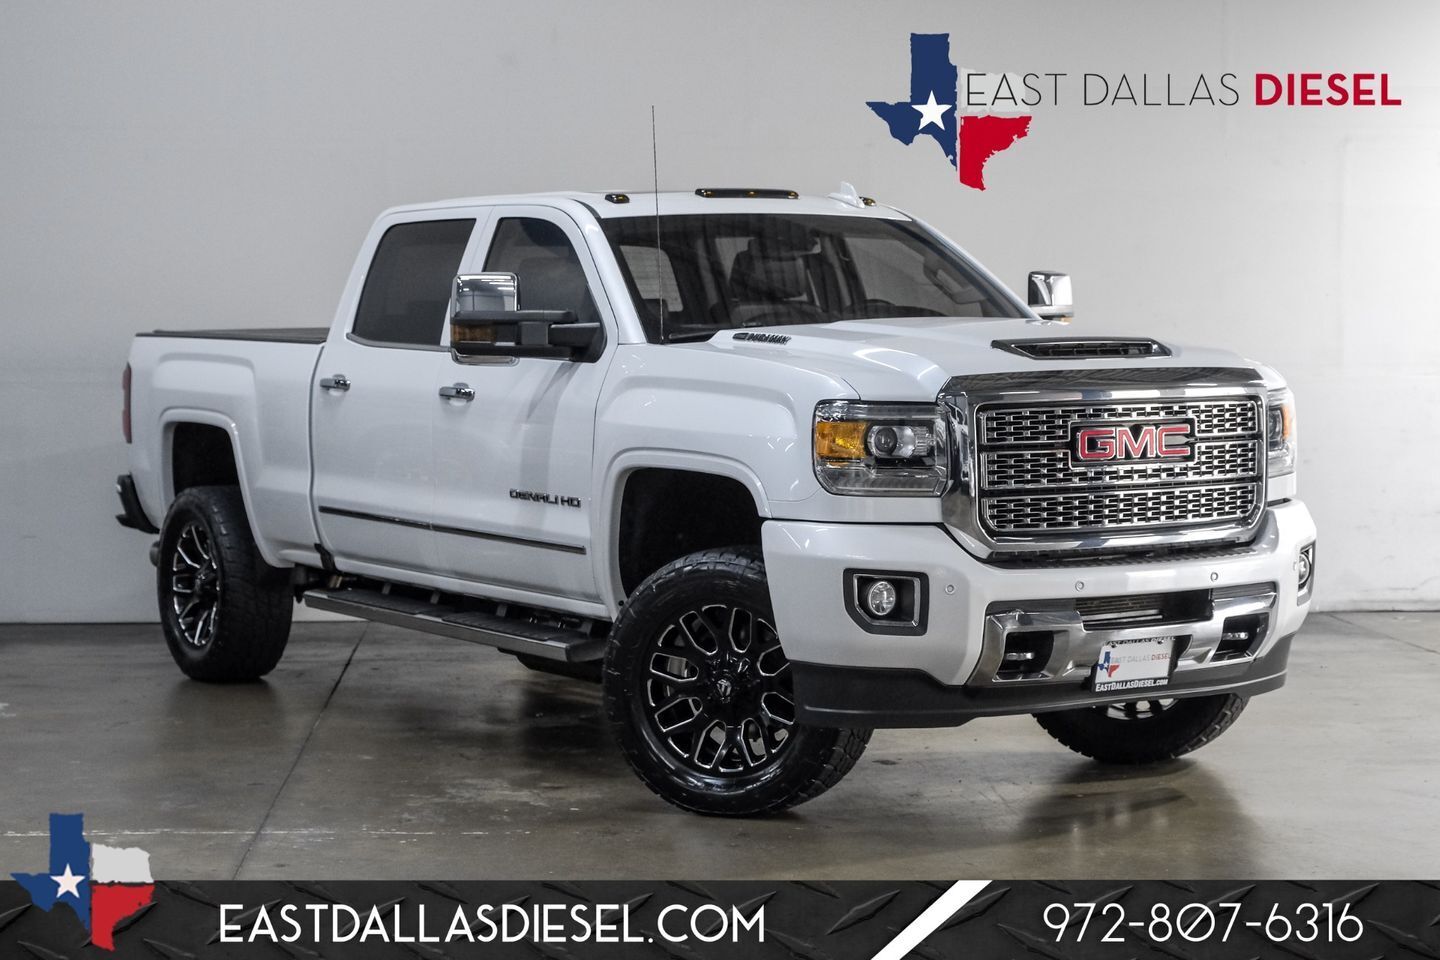 [G1W] White Frost Tricoat GMC Sierra 2500HD with 93562 Miles available now!